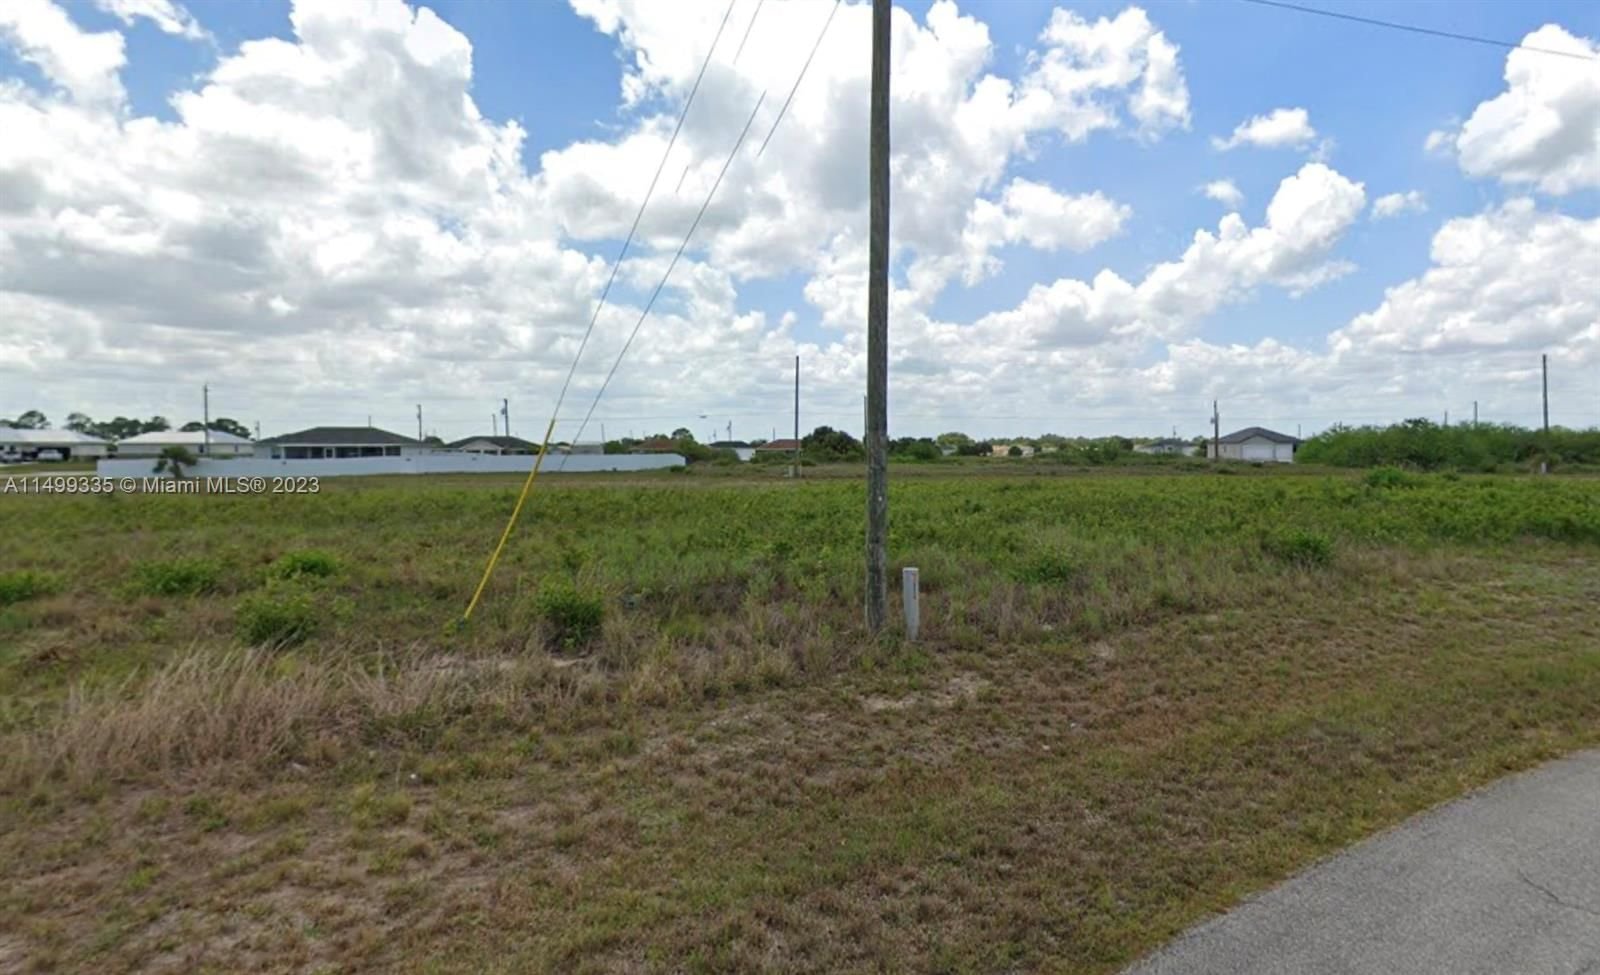 Real estate property located at 9013 Maywood, Hendry County, Port Labelle, La Belle, FL